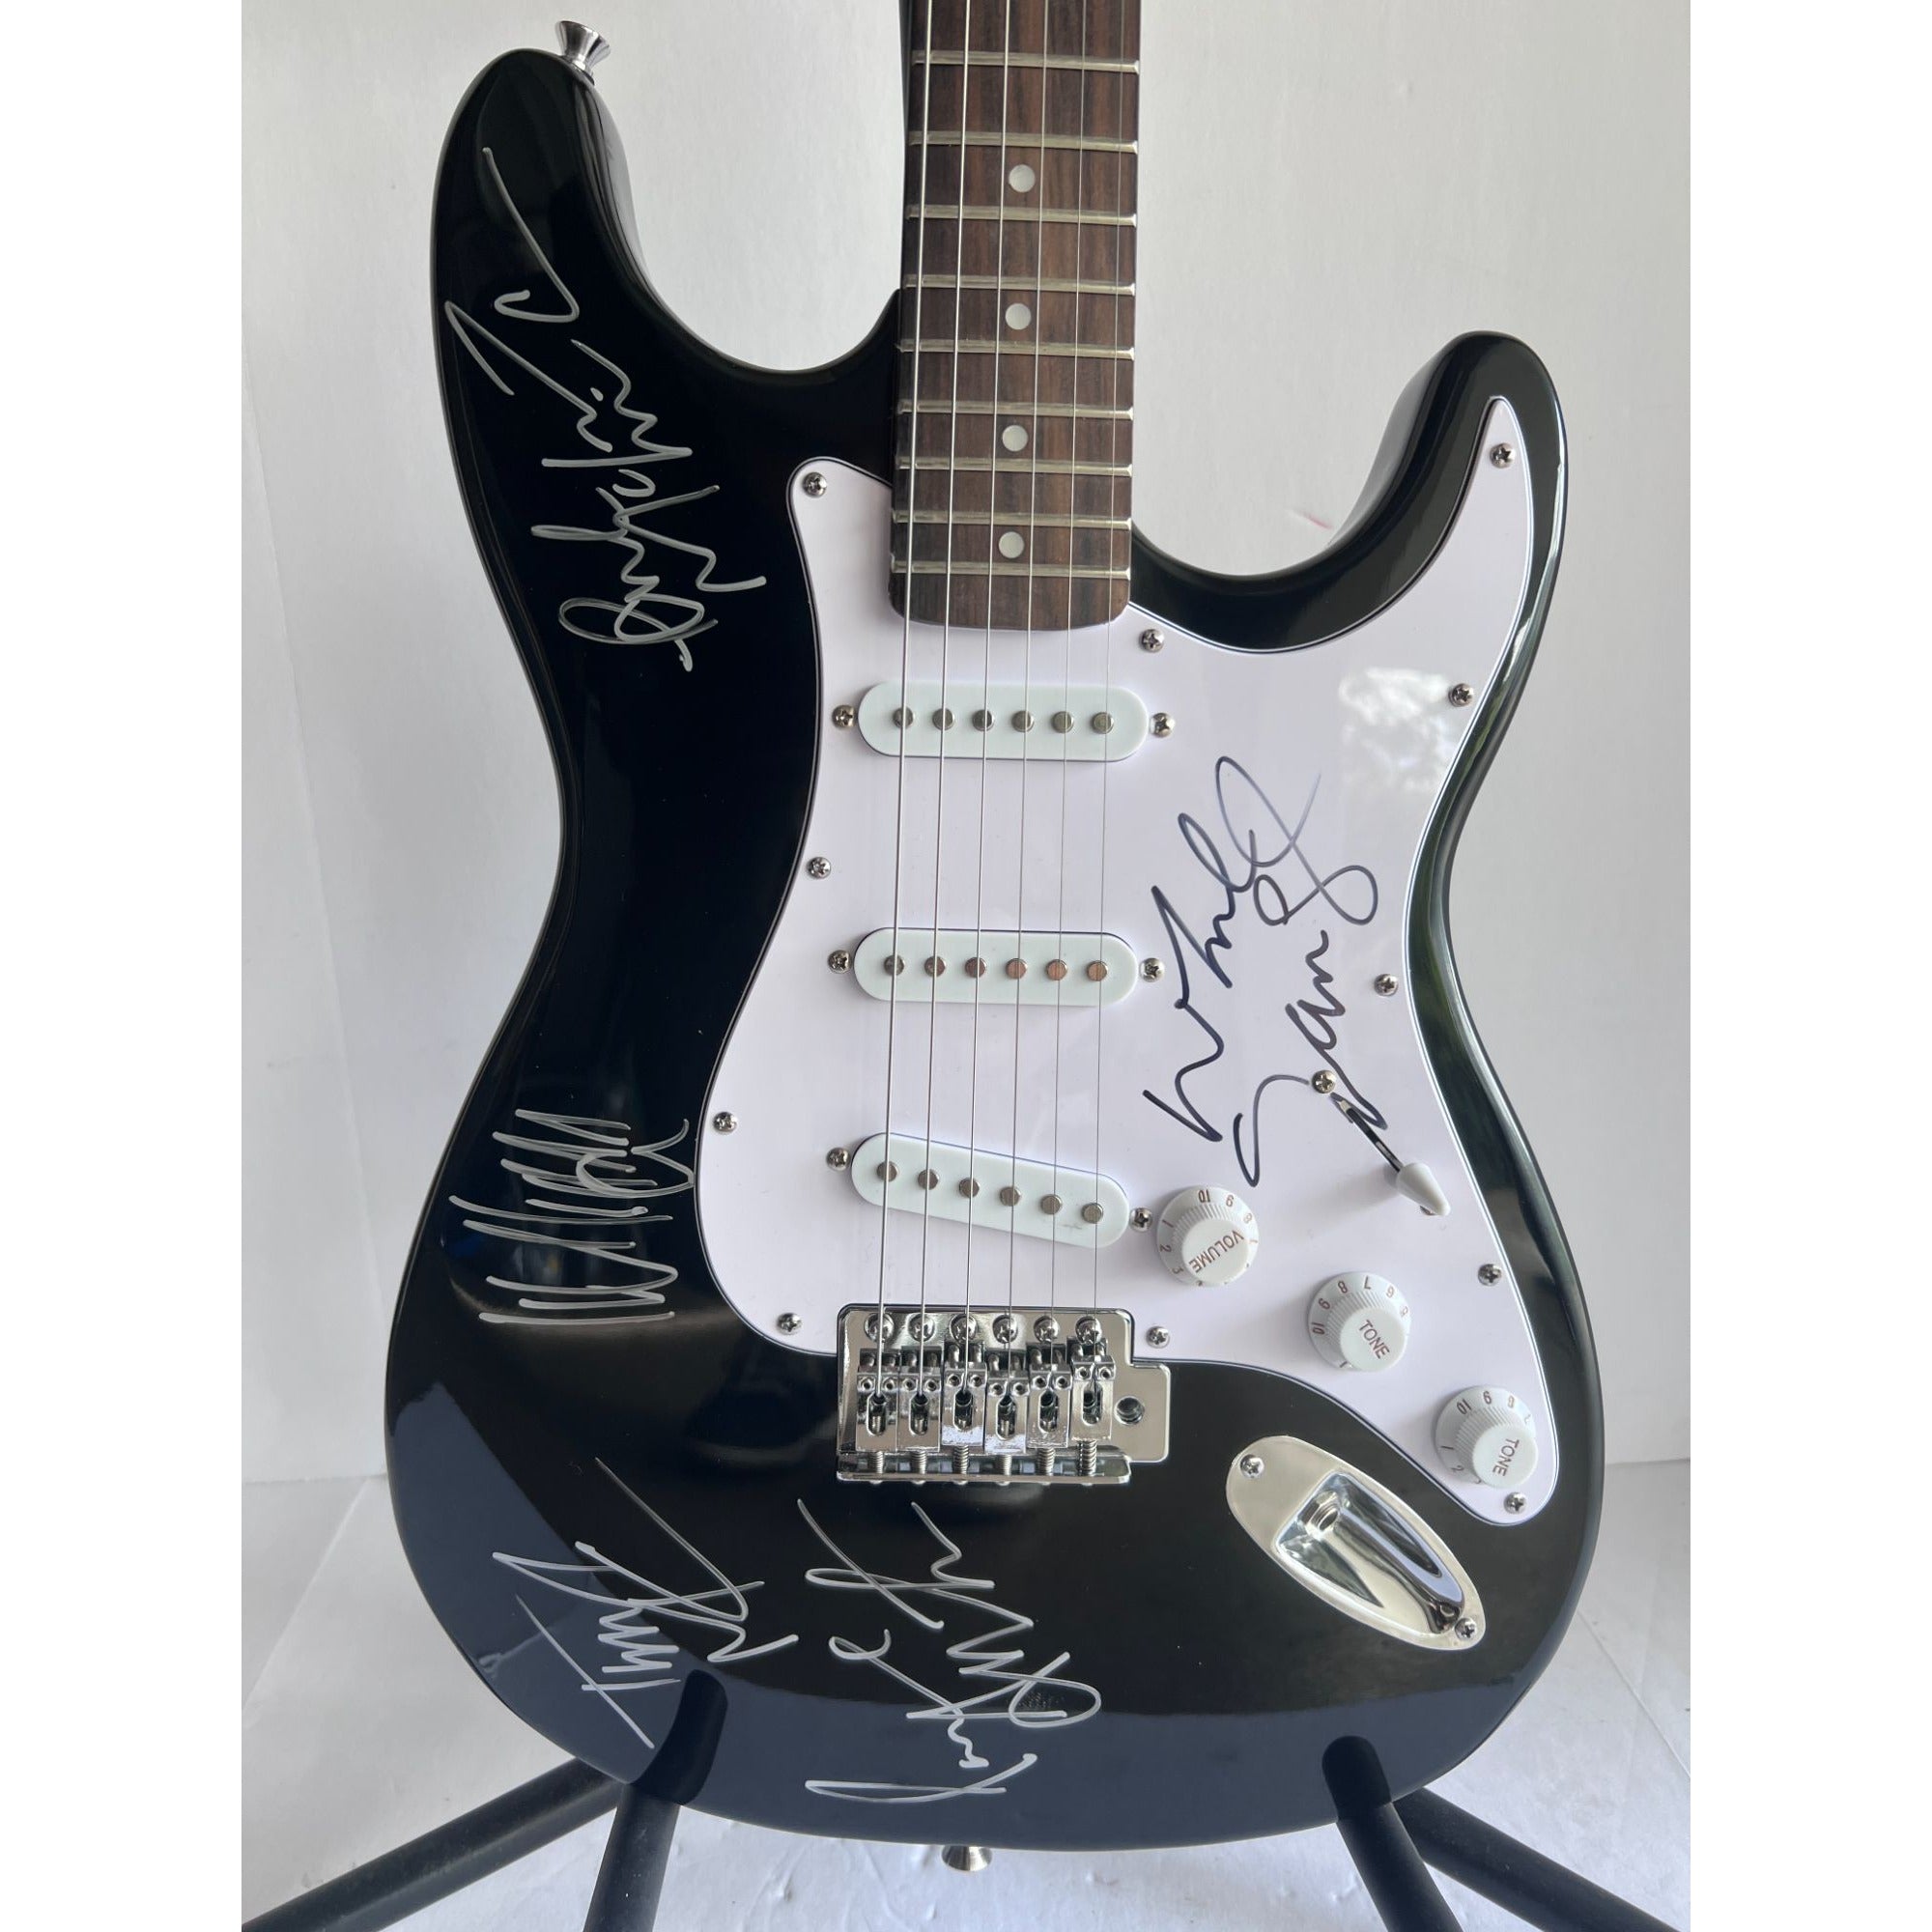 Noel Gallagher Oasis  stratocaster electric guitar  signed with proof